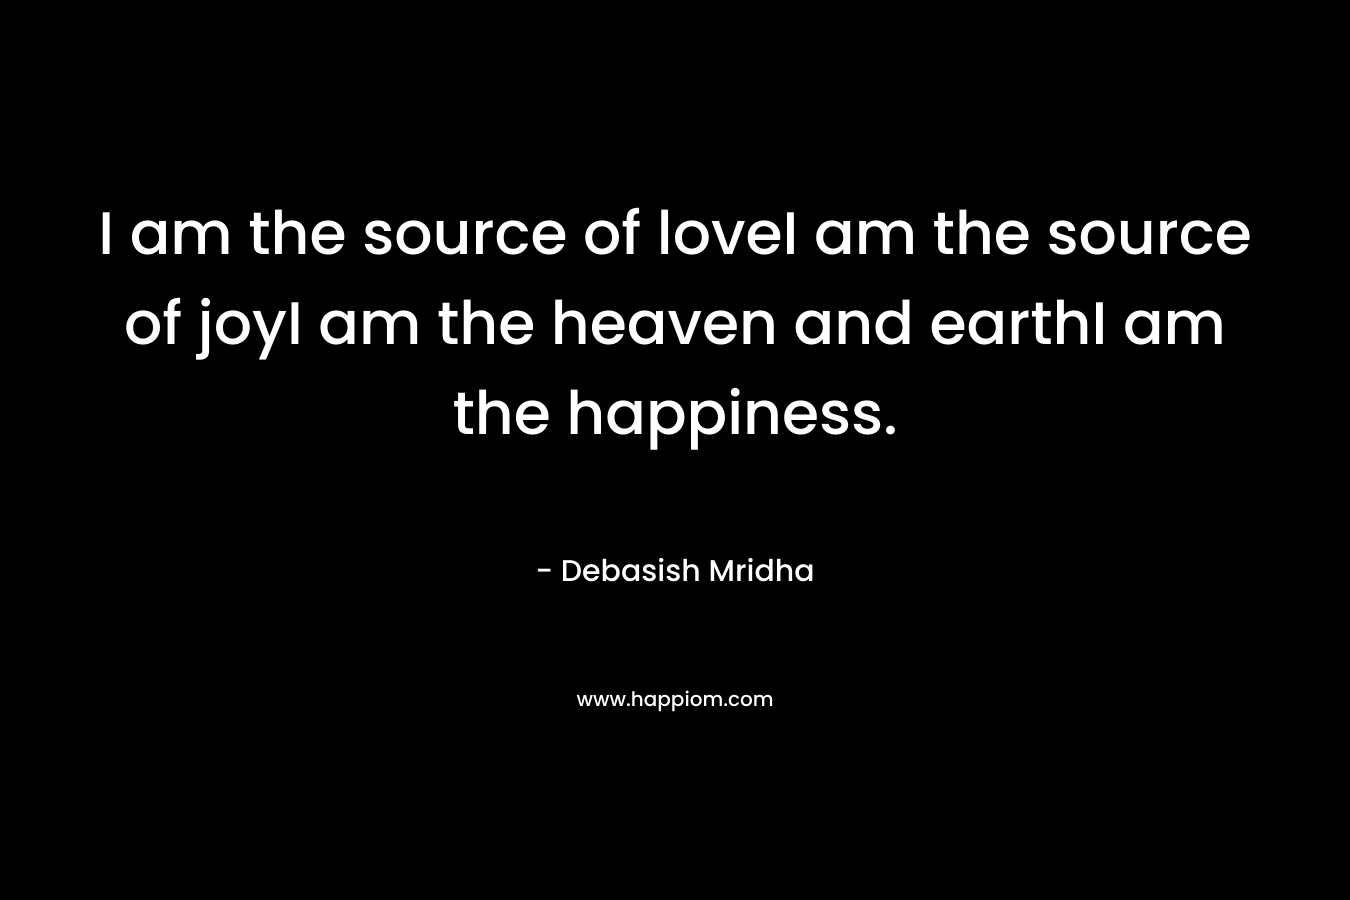 I am the source of loveI am the source of joyI am the heaven and earthI am the happiness.